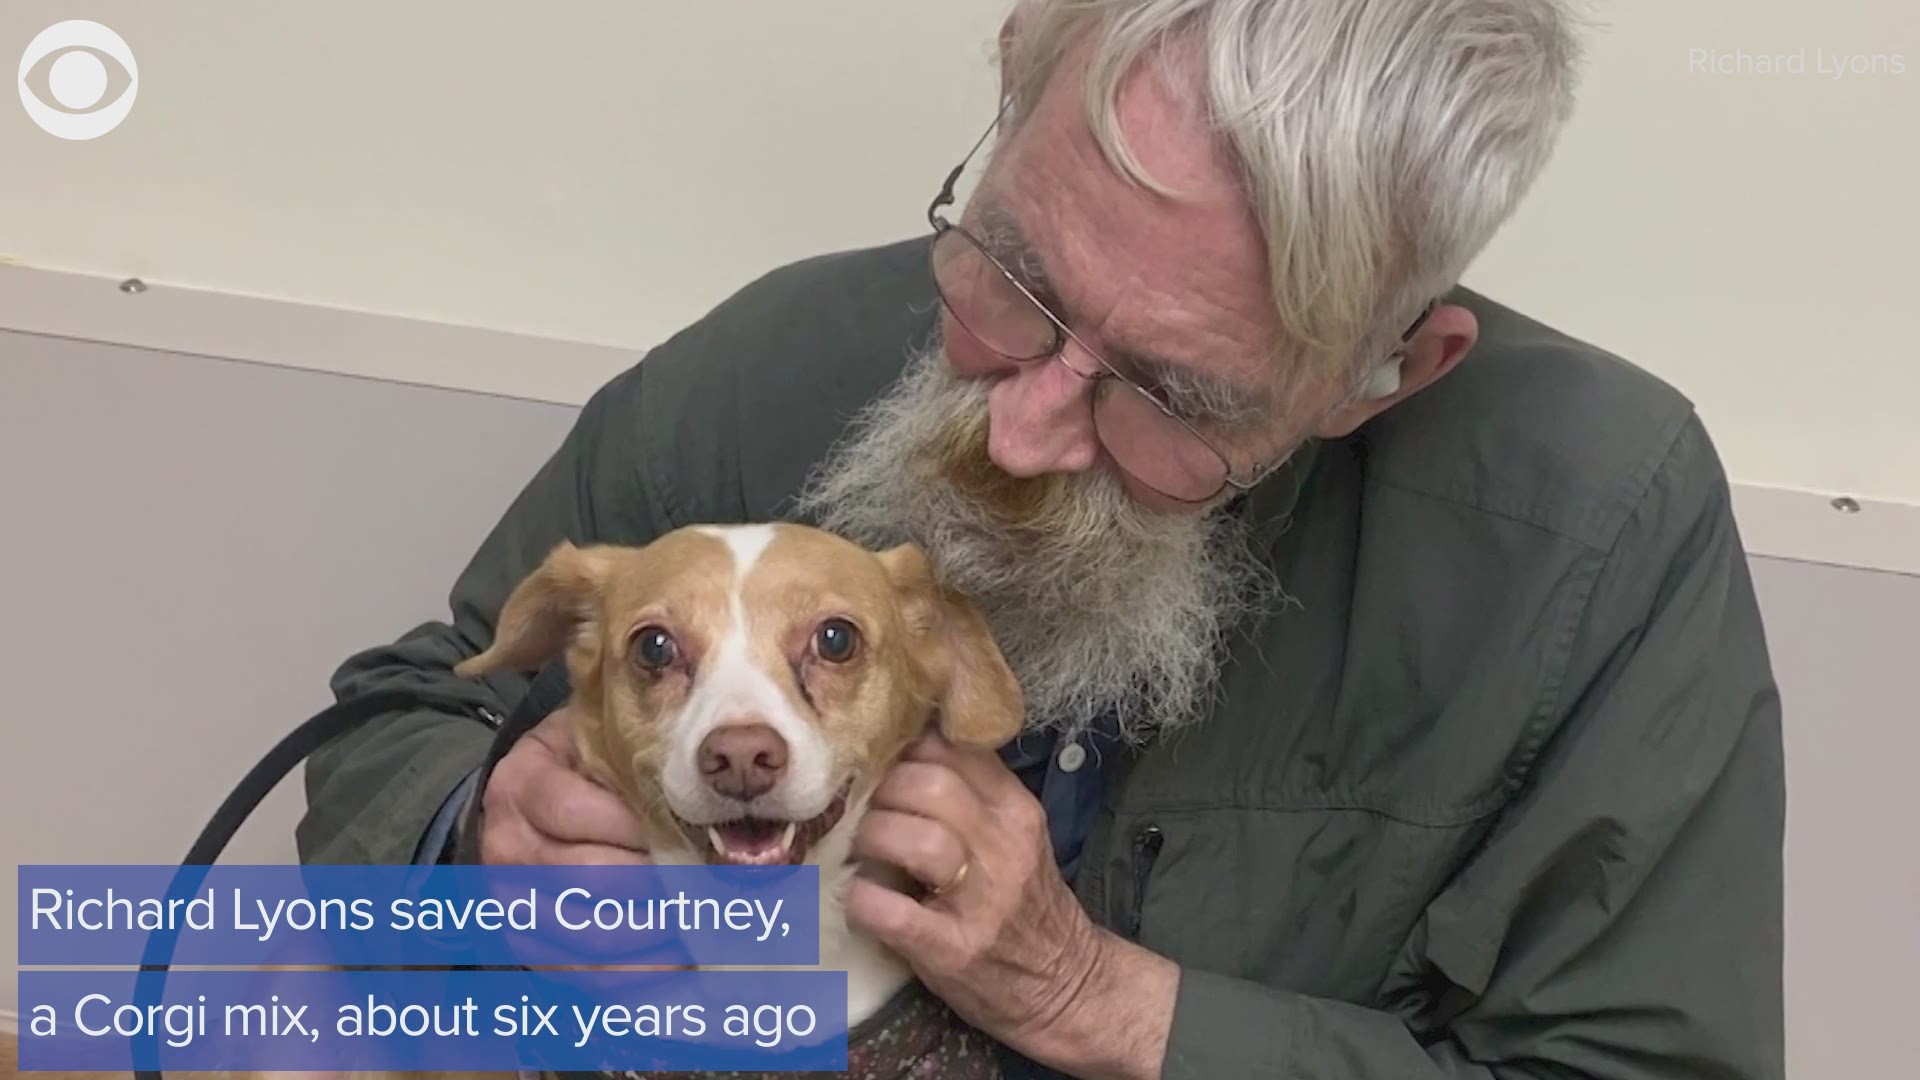 When a Vietnam veteran's dog needed surgery, "The Street Vet" stepped in to help cover the cost.